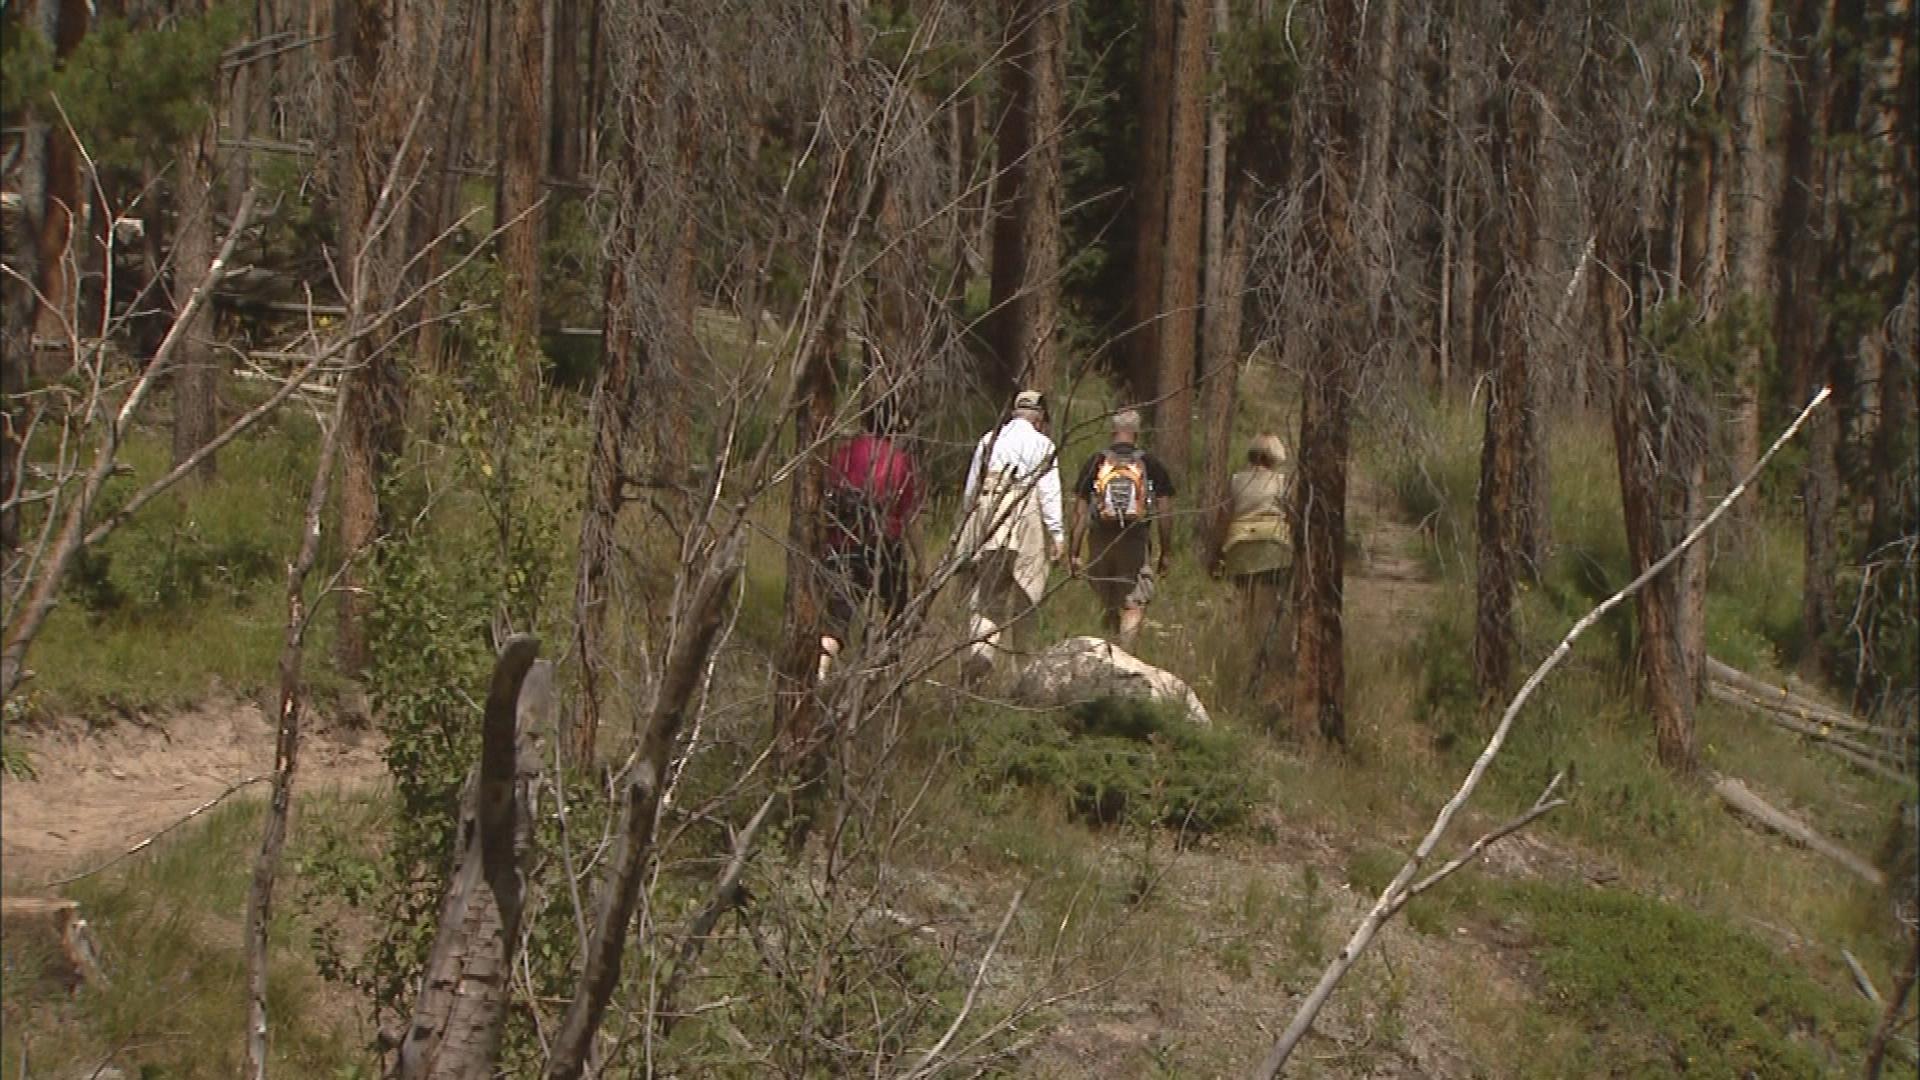 Image from a Colorado Getaways feature on the national park on Sept. 2, 2011 (credit: CBS)